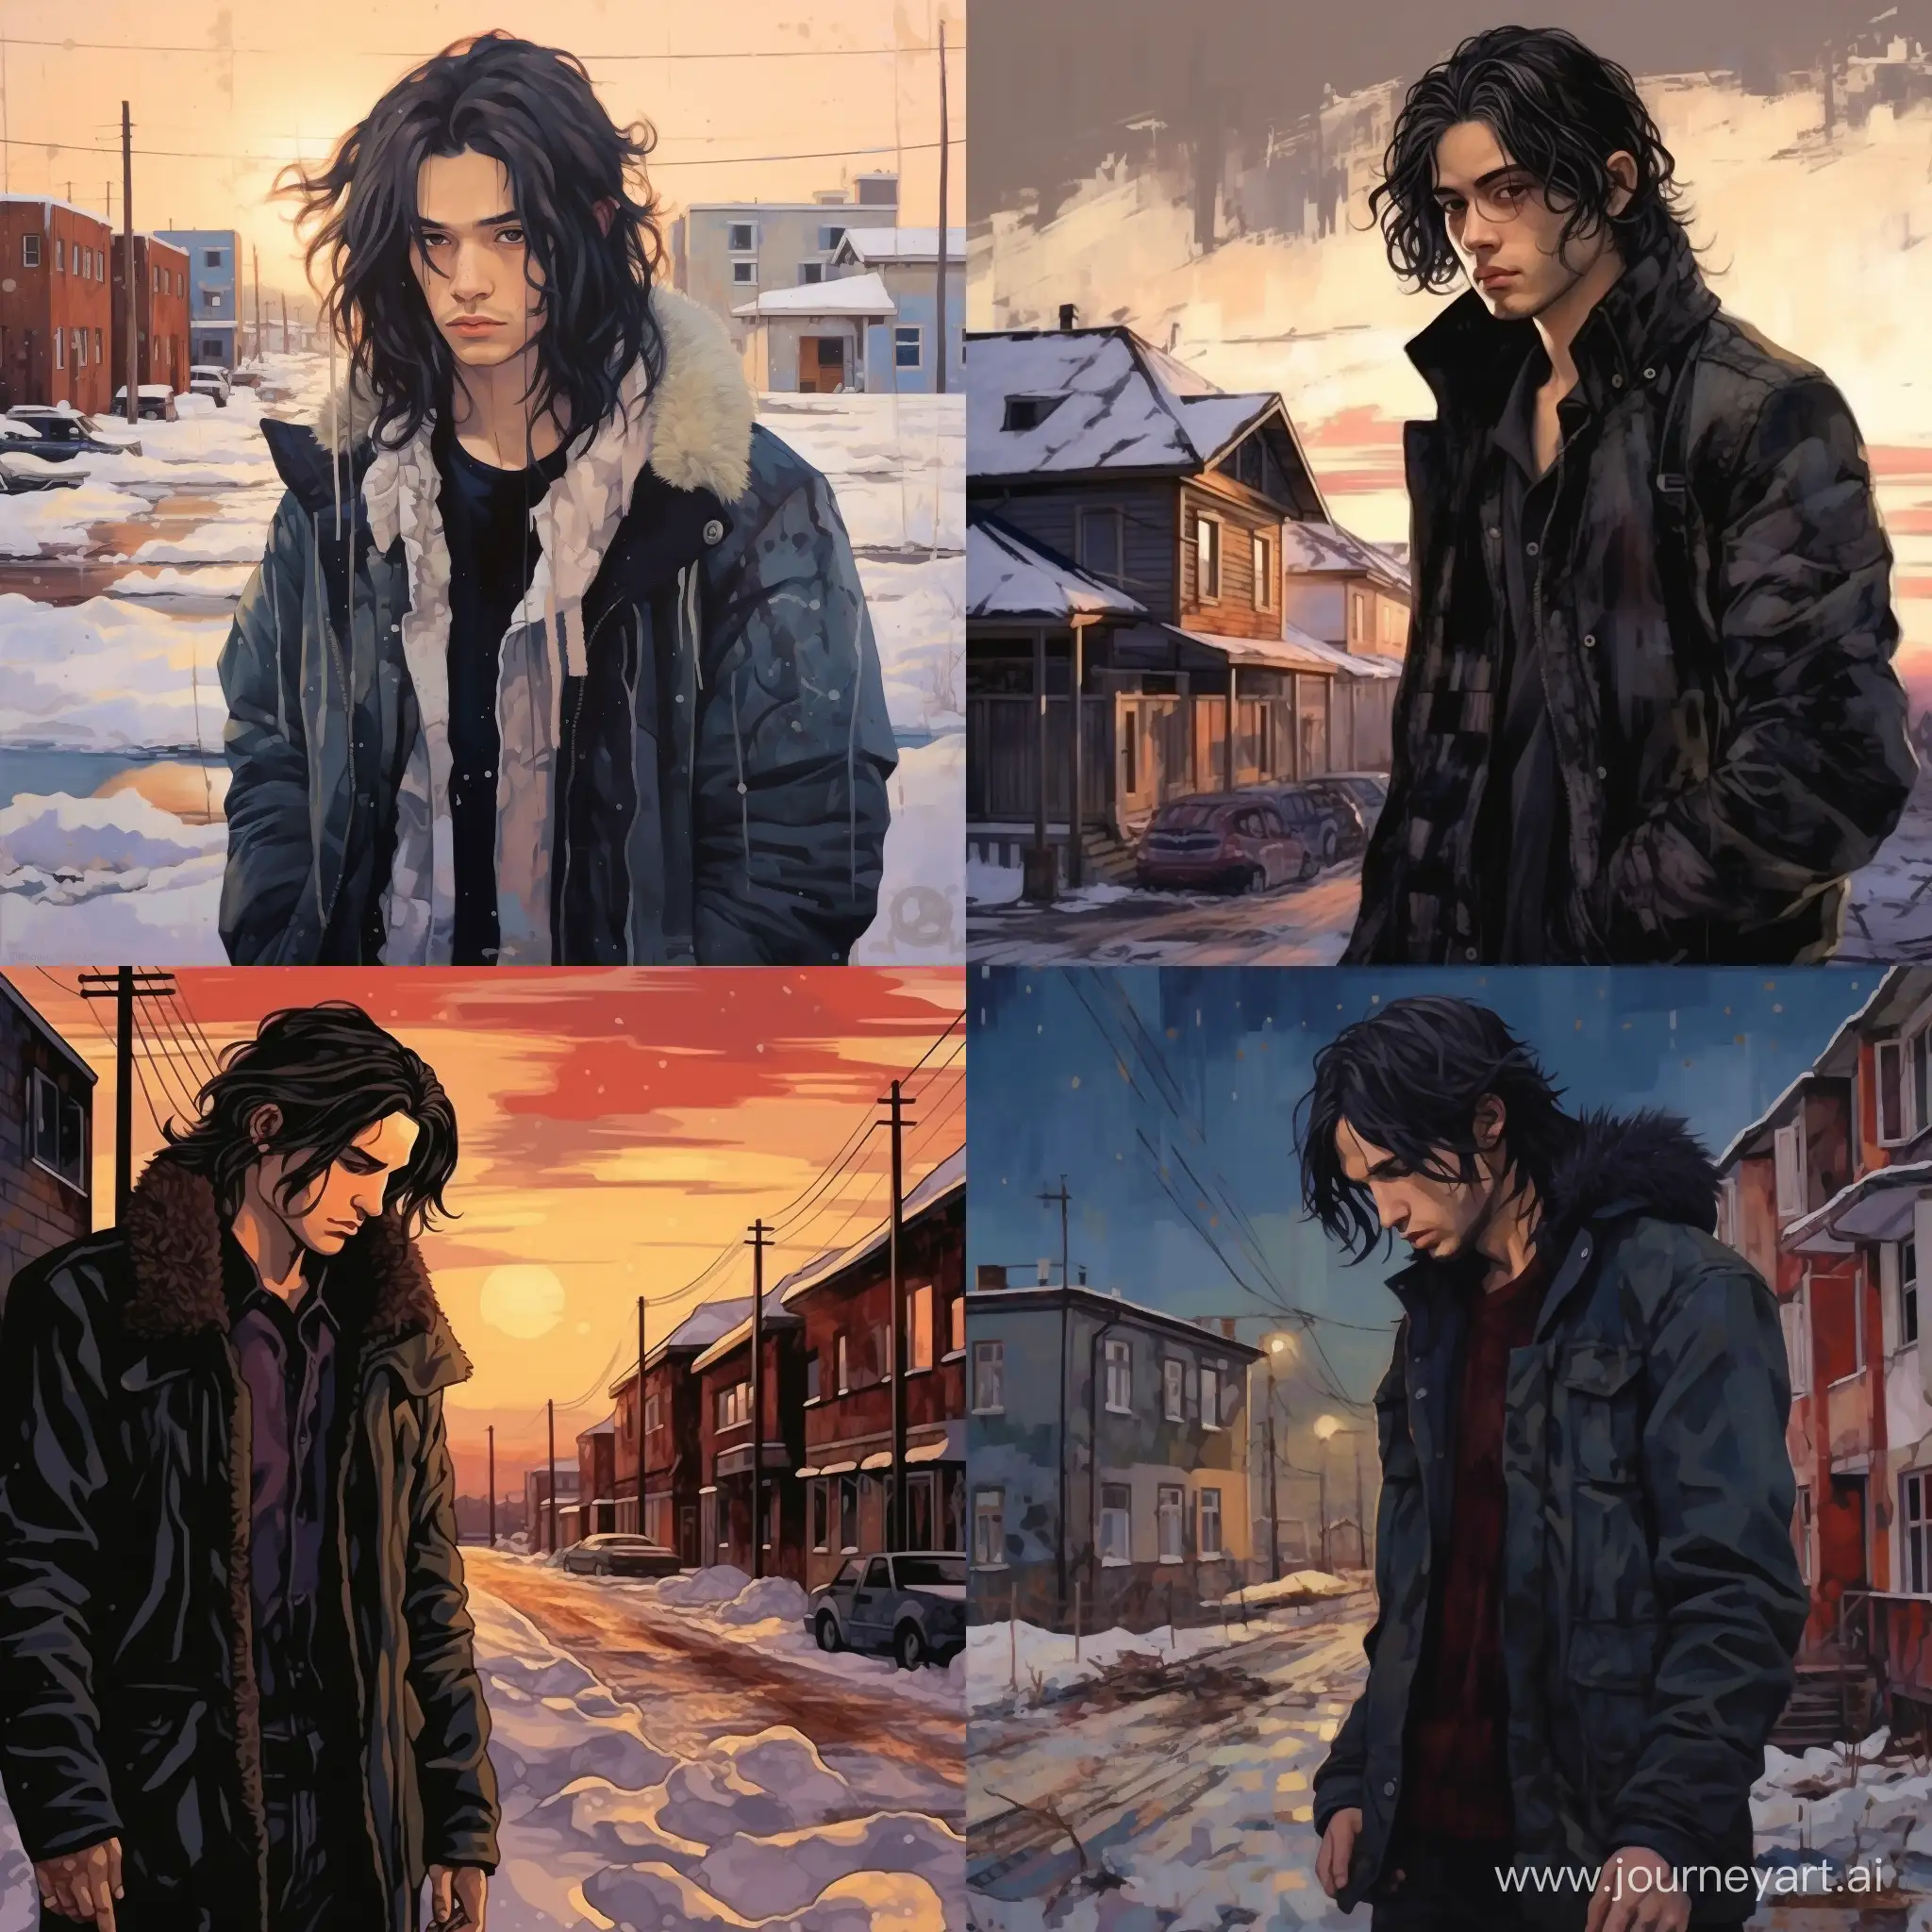 Urban-Microdistrict-Young-Man-with-Long-Hair-in-Torn-Clothing-and-Blood-on-Asphalt